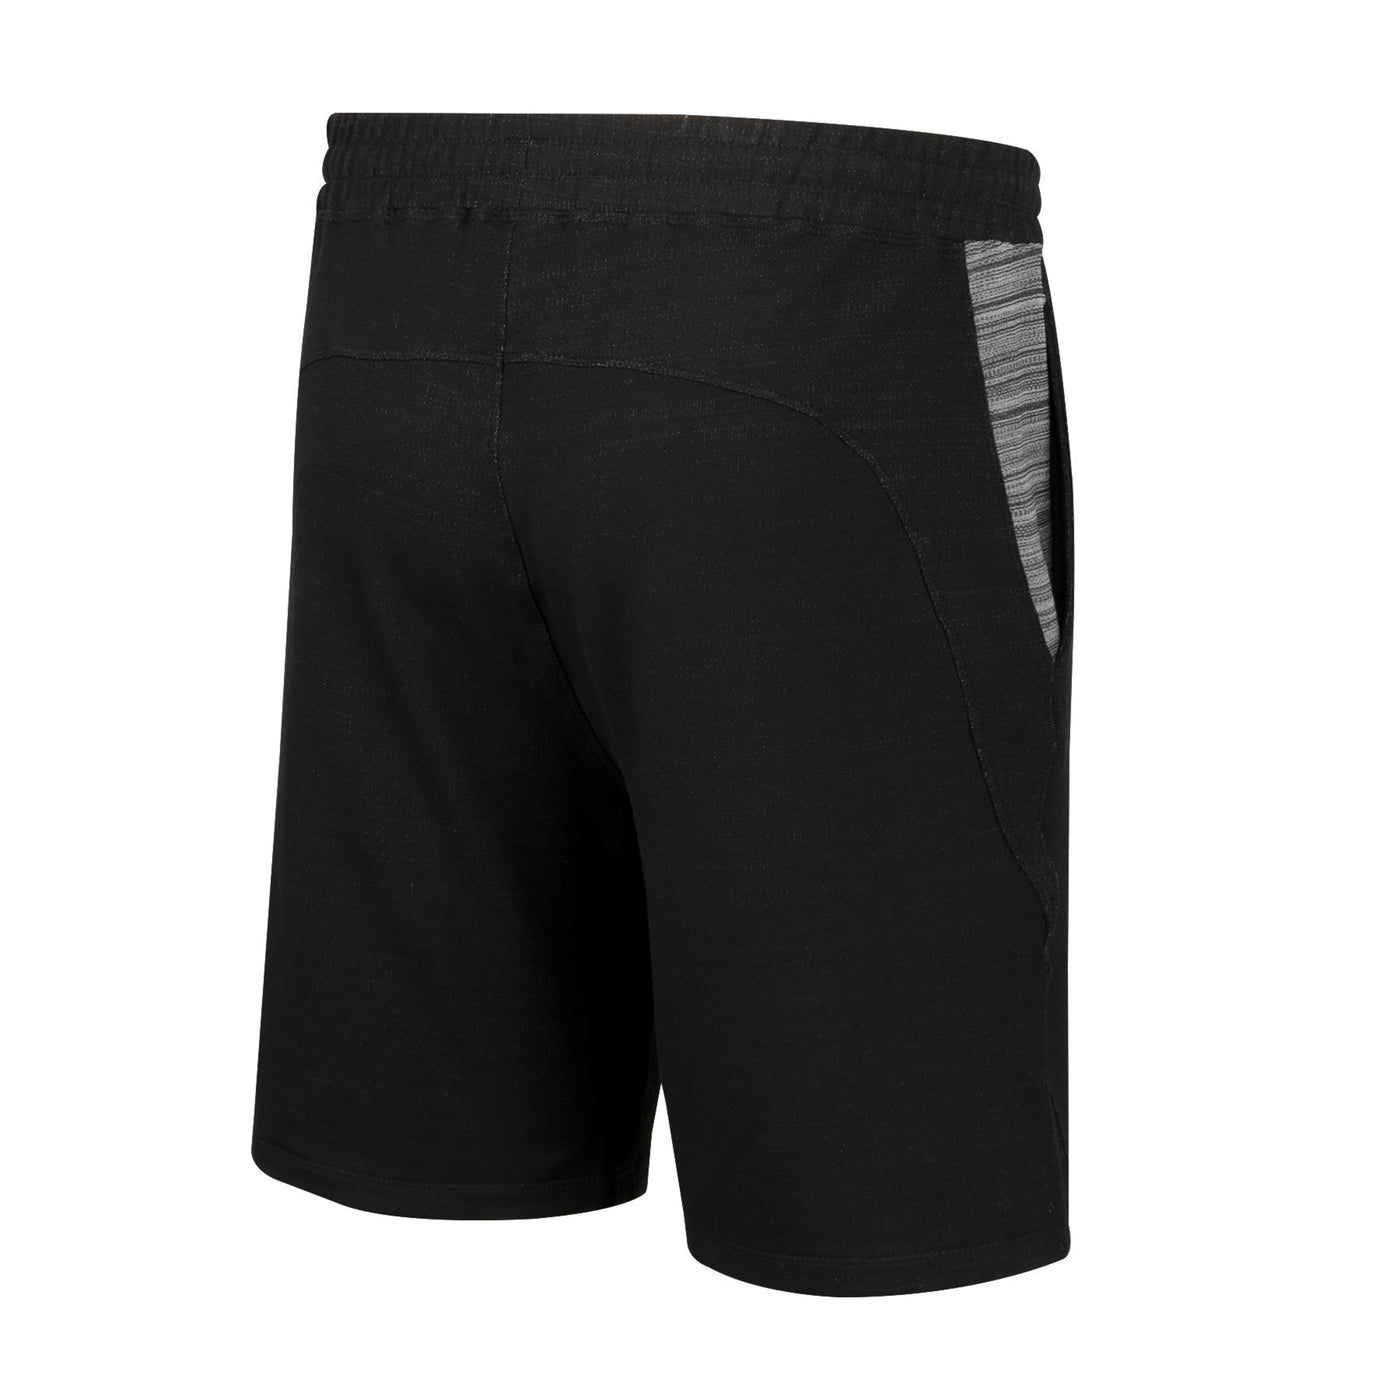 ASU black men's shorts with heather gray triangles at the pockets